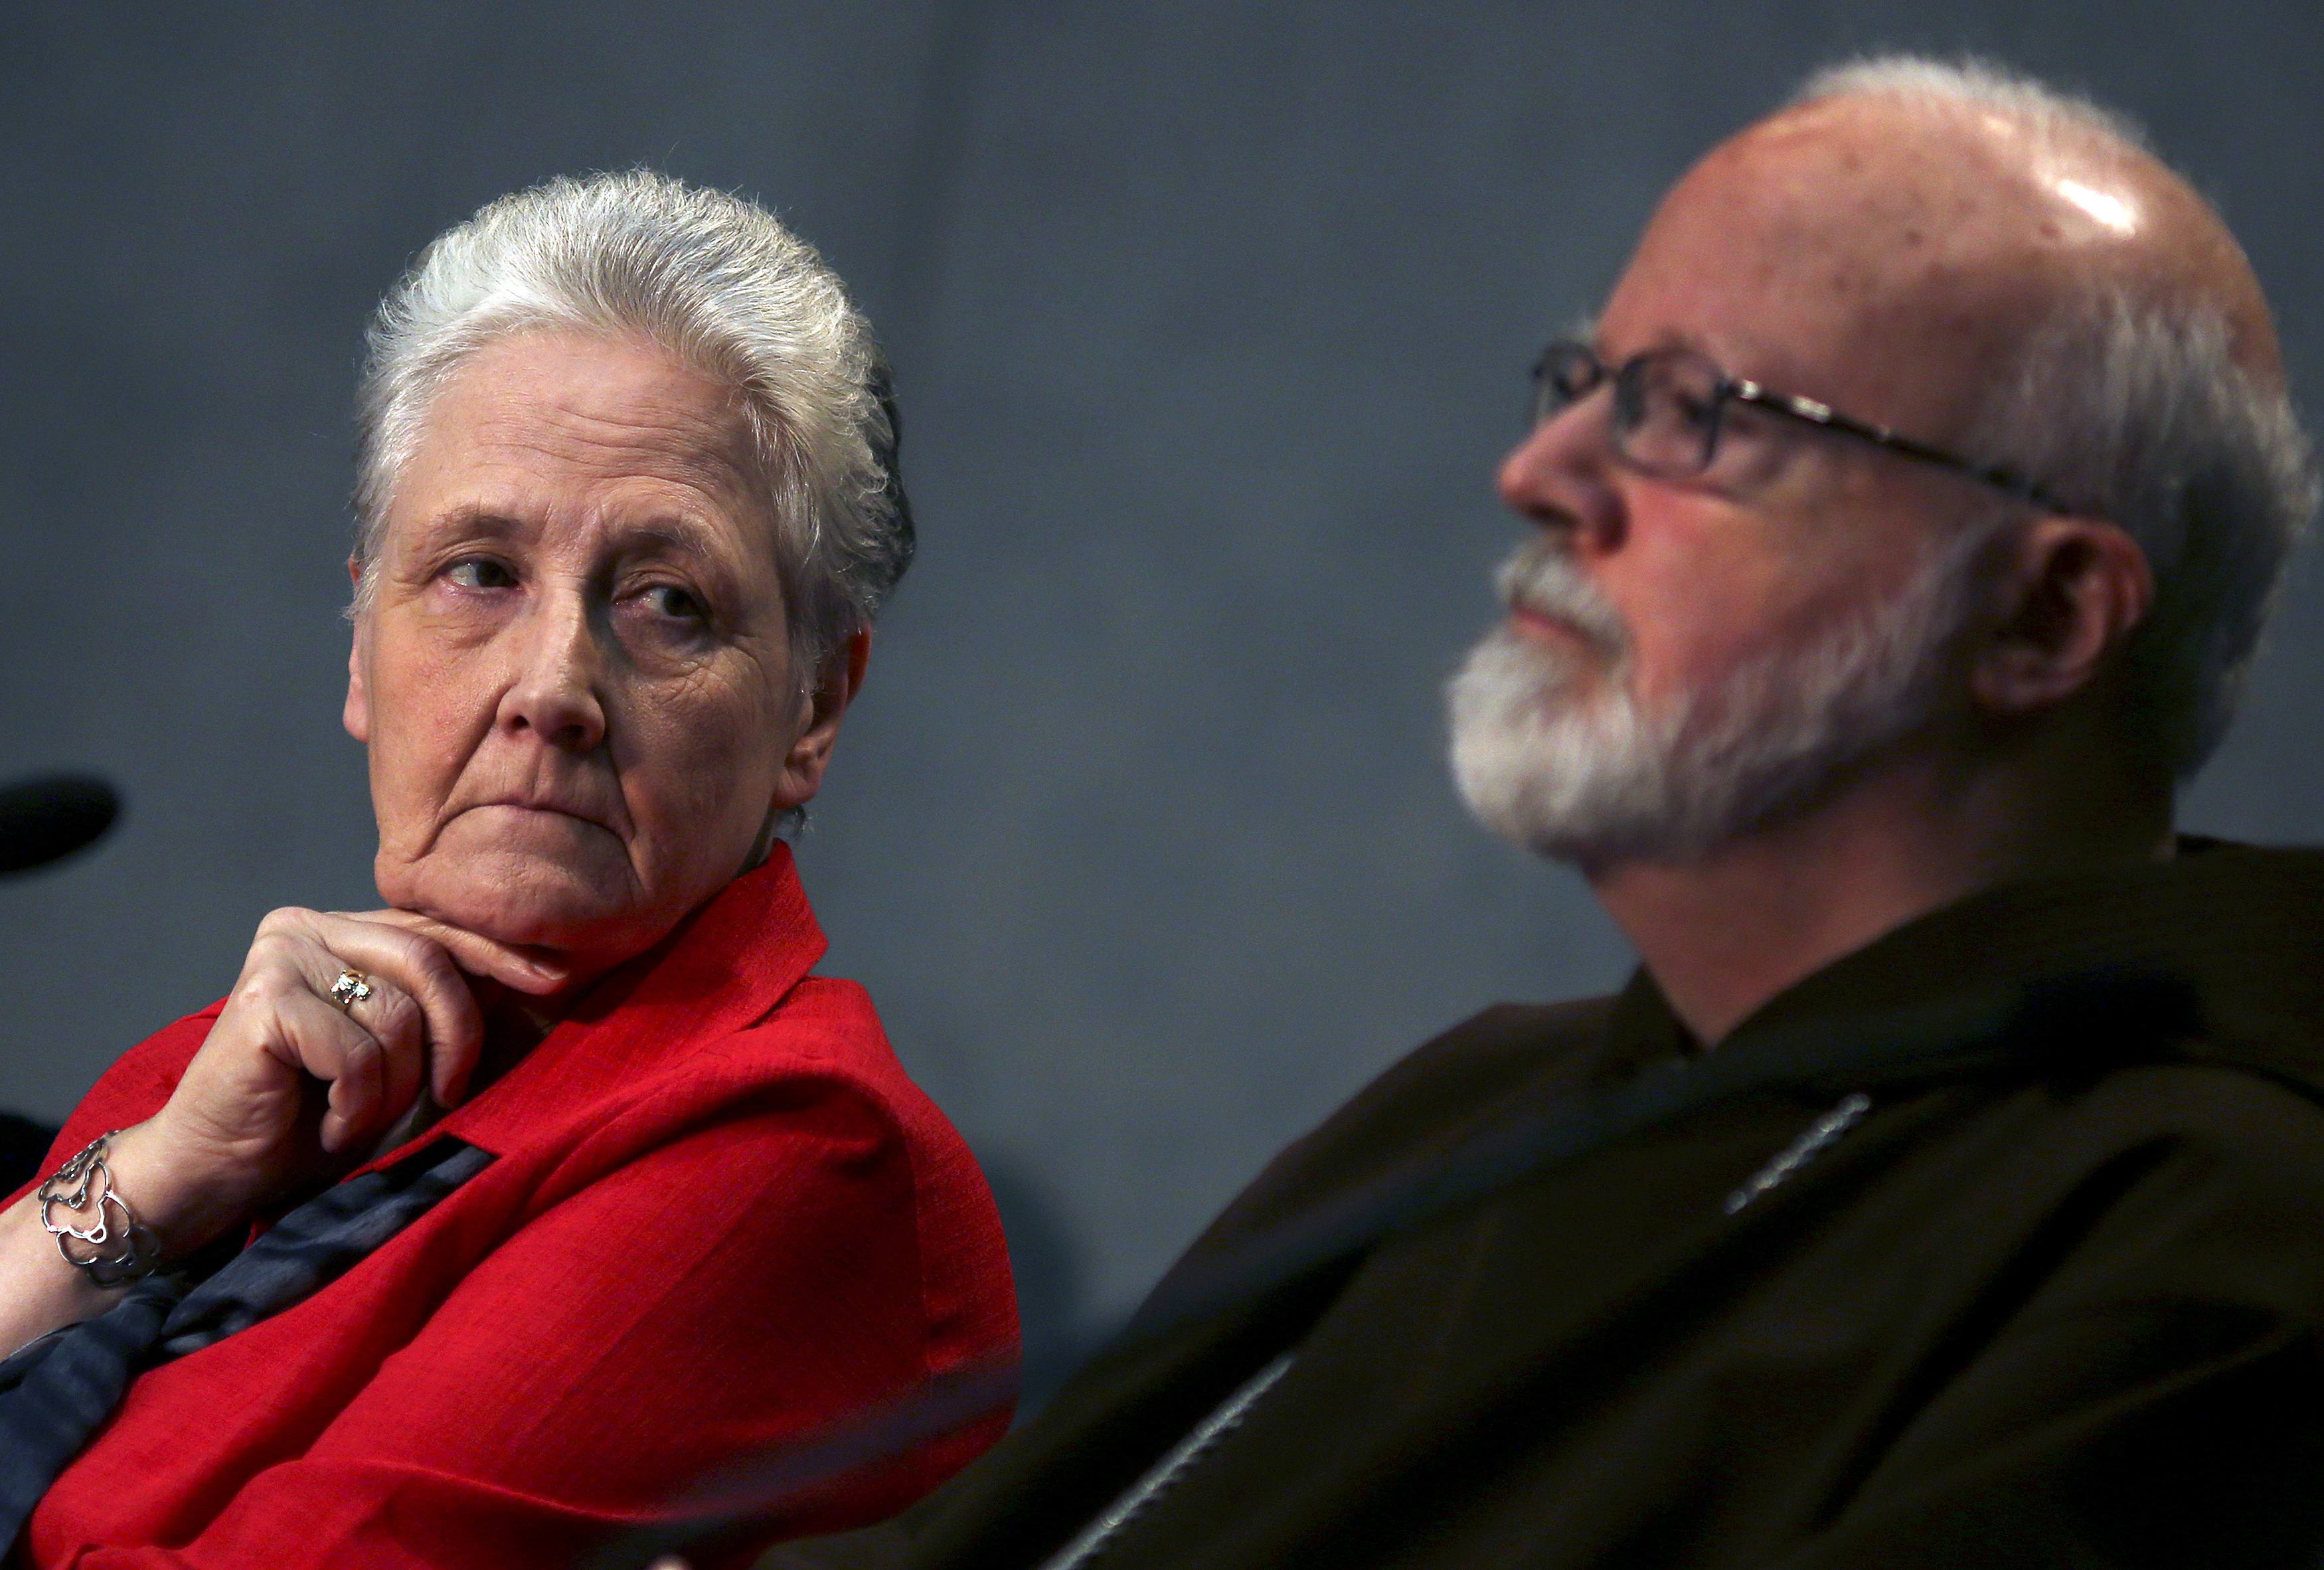 Irish abuse victim Marie Collins, a clerical abuse survivor nominated by Pope Francis to sit on the new Pontifical Commission for the Protection of Minors, looks at Boston Cardinal Sean O'Malley during their first briefing at the Holy See press office at the Vatican in May 2014. (CNS/Reuters/Alessandro Bianchi)